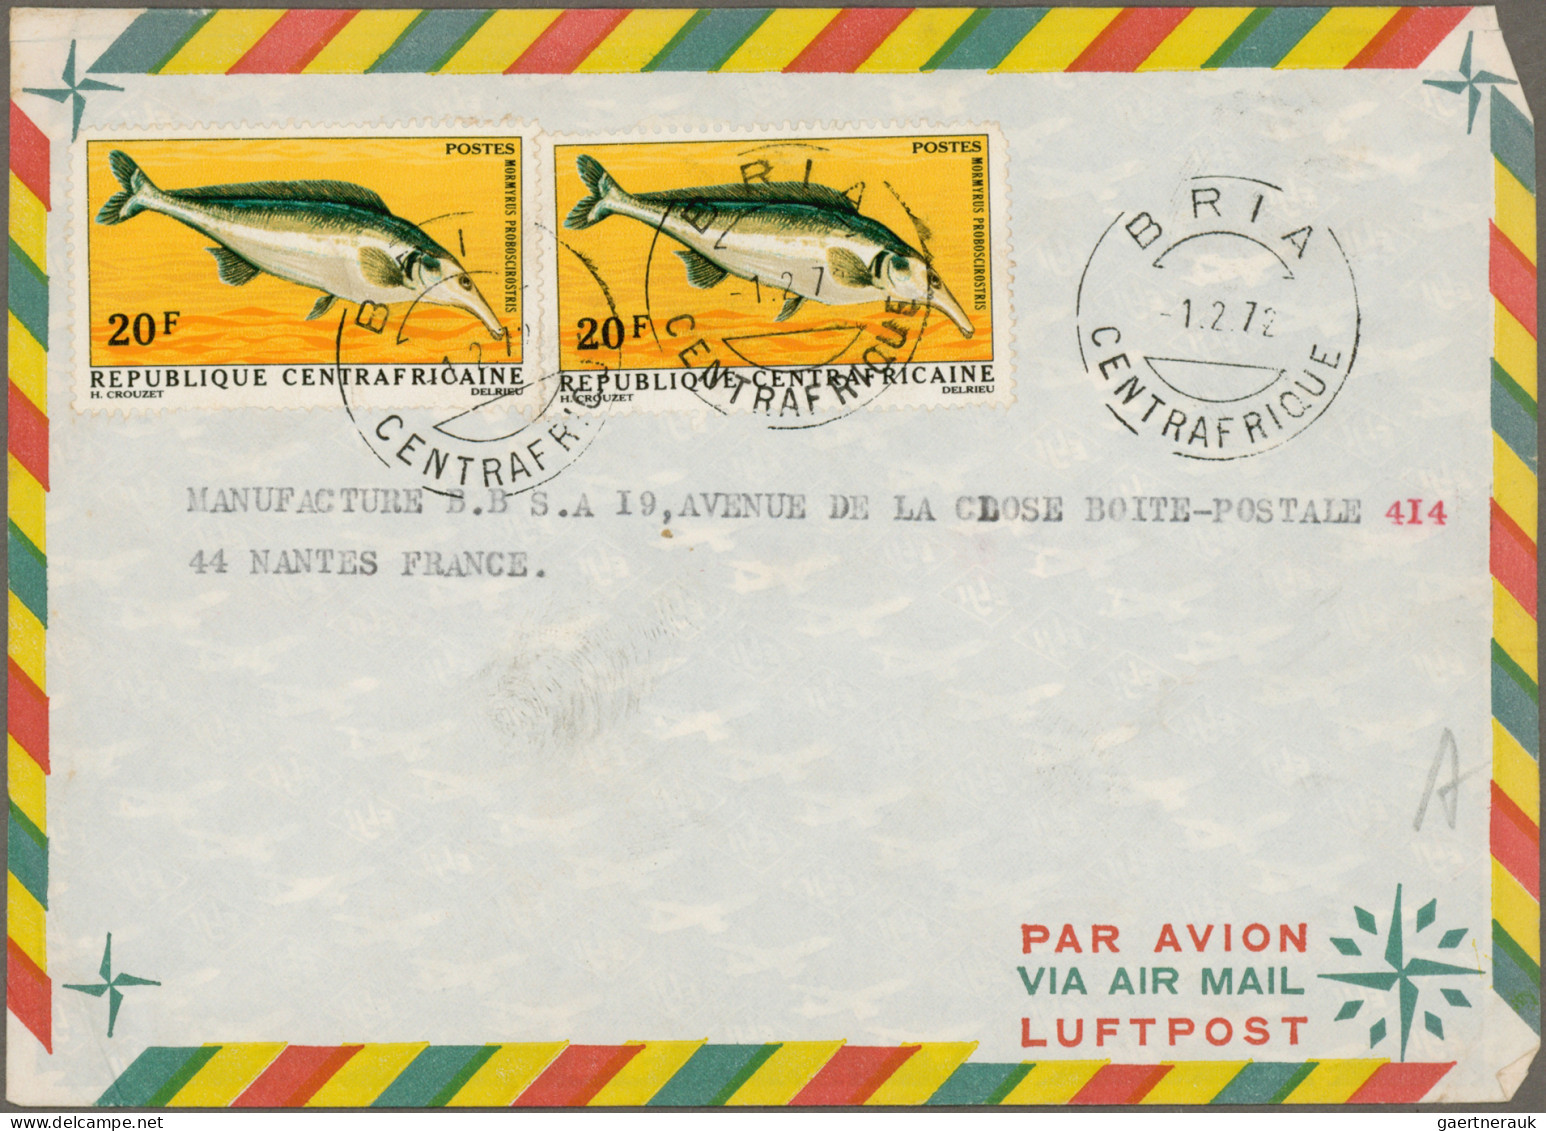 Thematics: Animals-fishes: 1950/1986, France/French Area, Assortment Of Apprx. 8 - Fishes